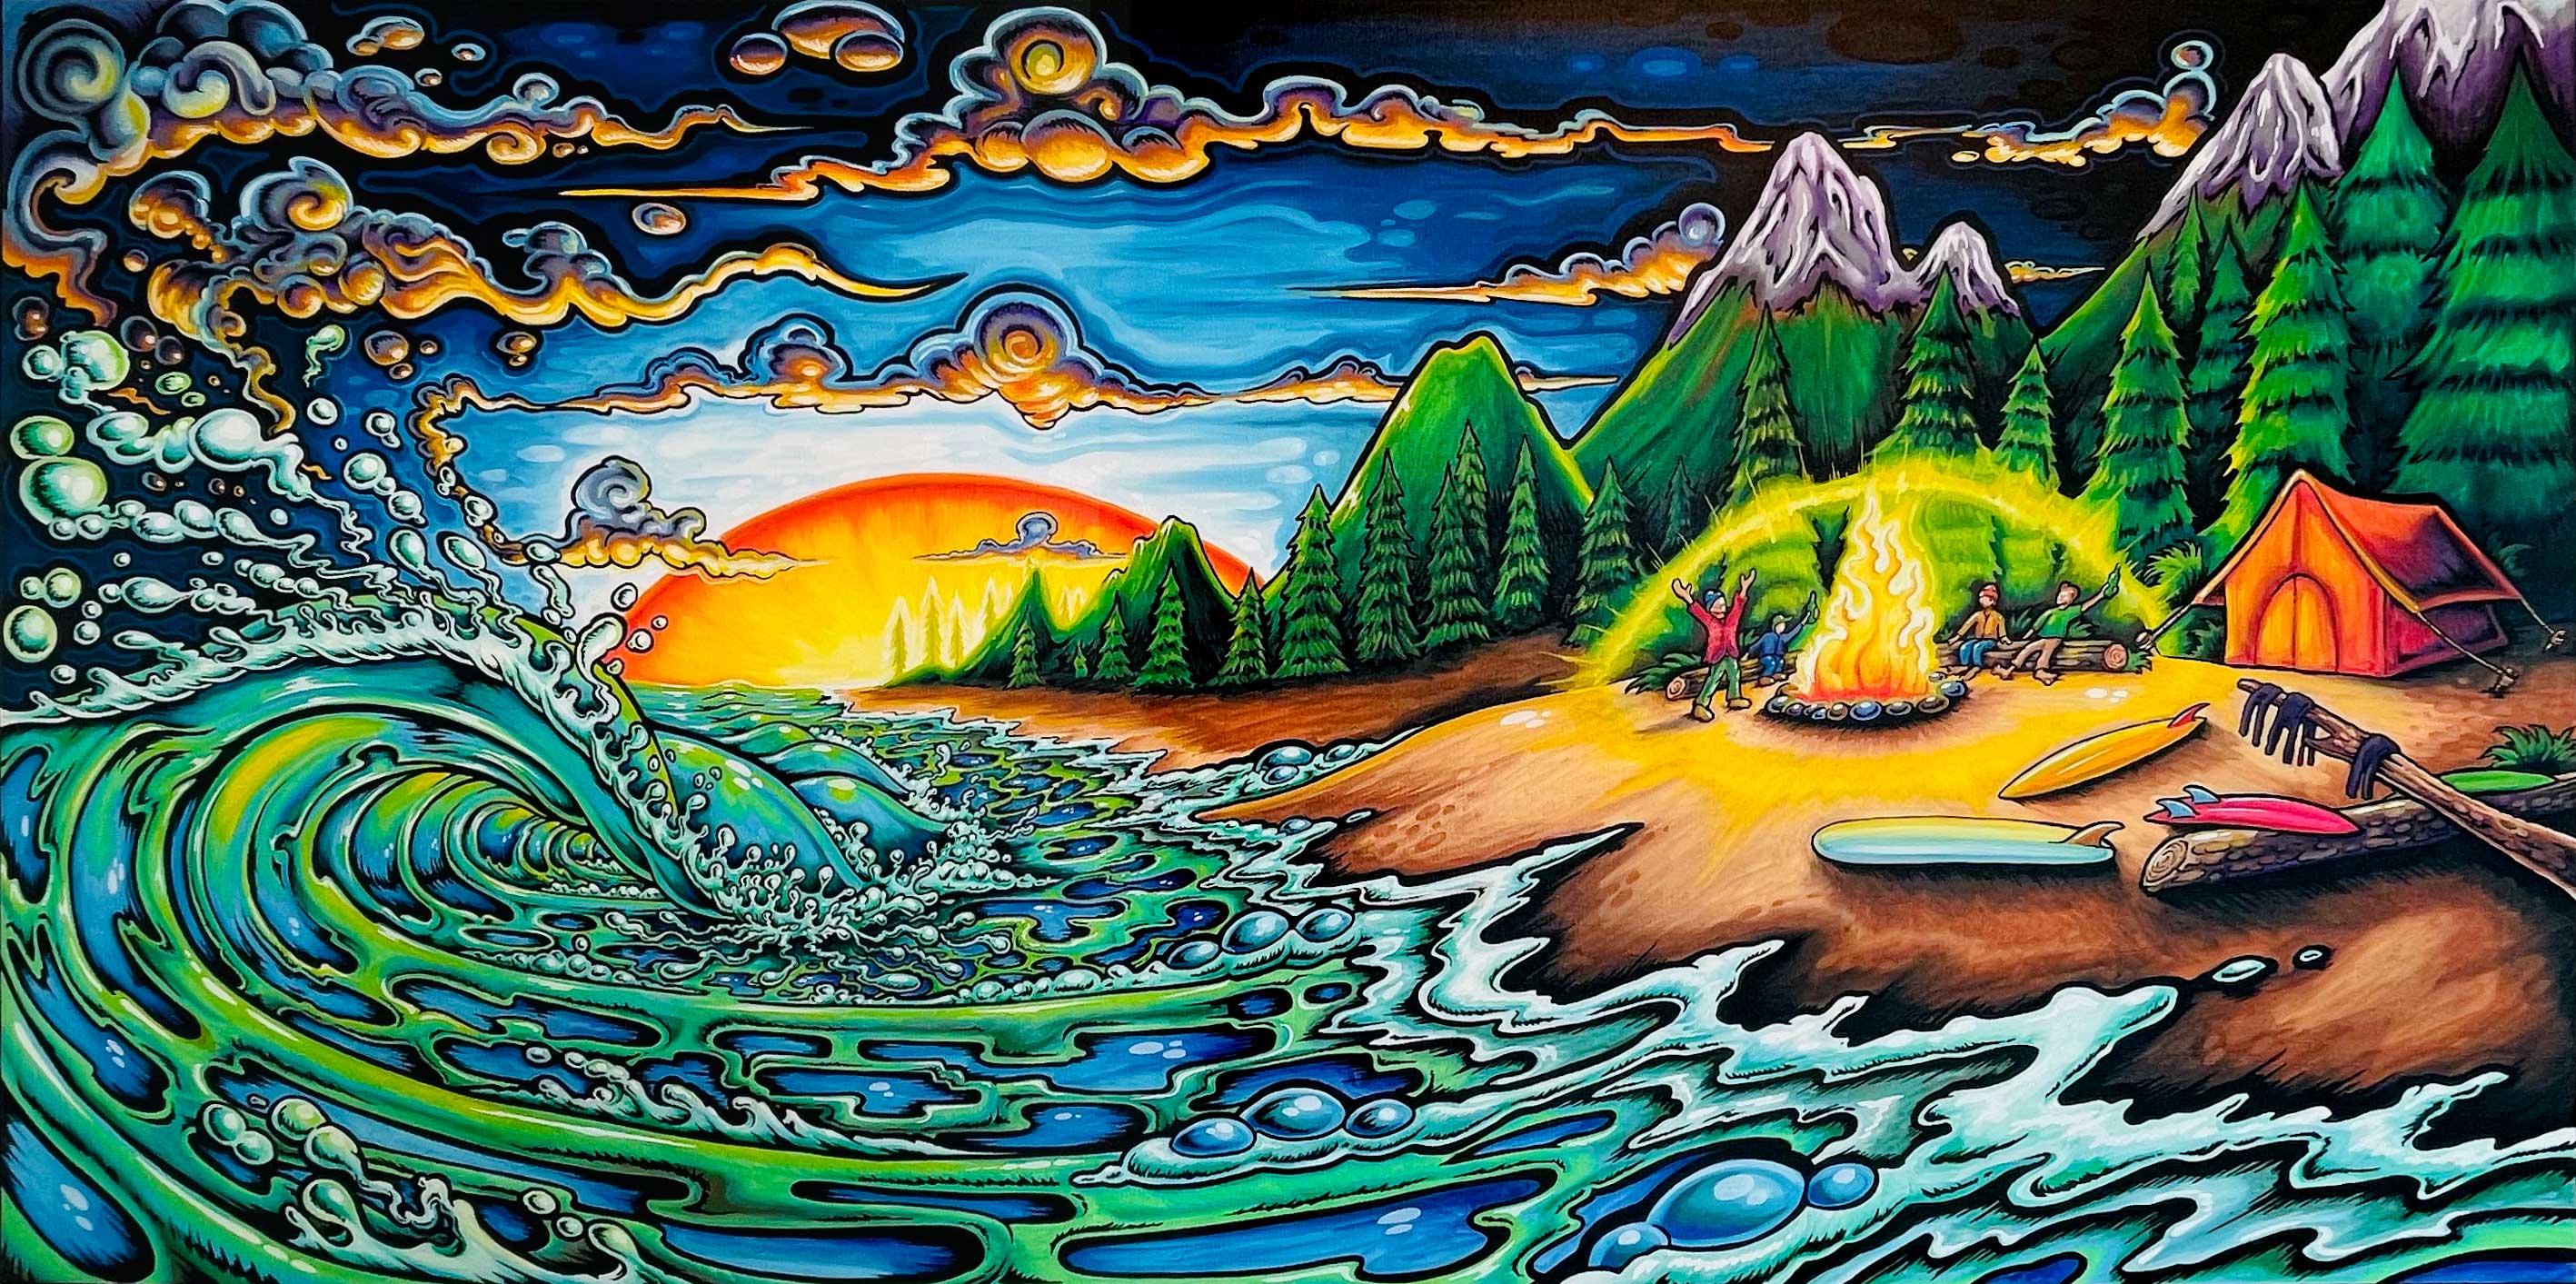 Surf art by Drew Brophy. Enjoying time with friends around a camp fire where the mountains meet the ocean 